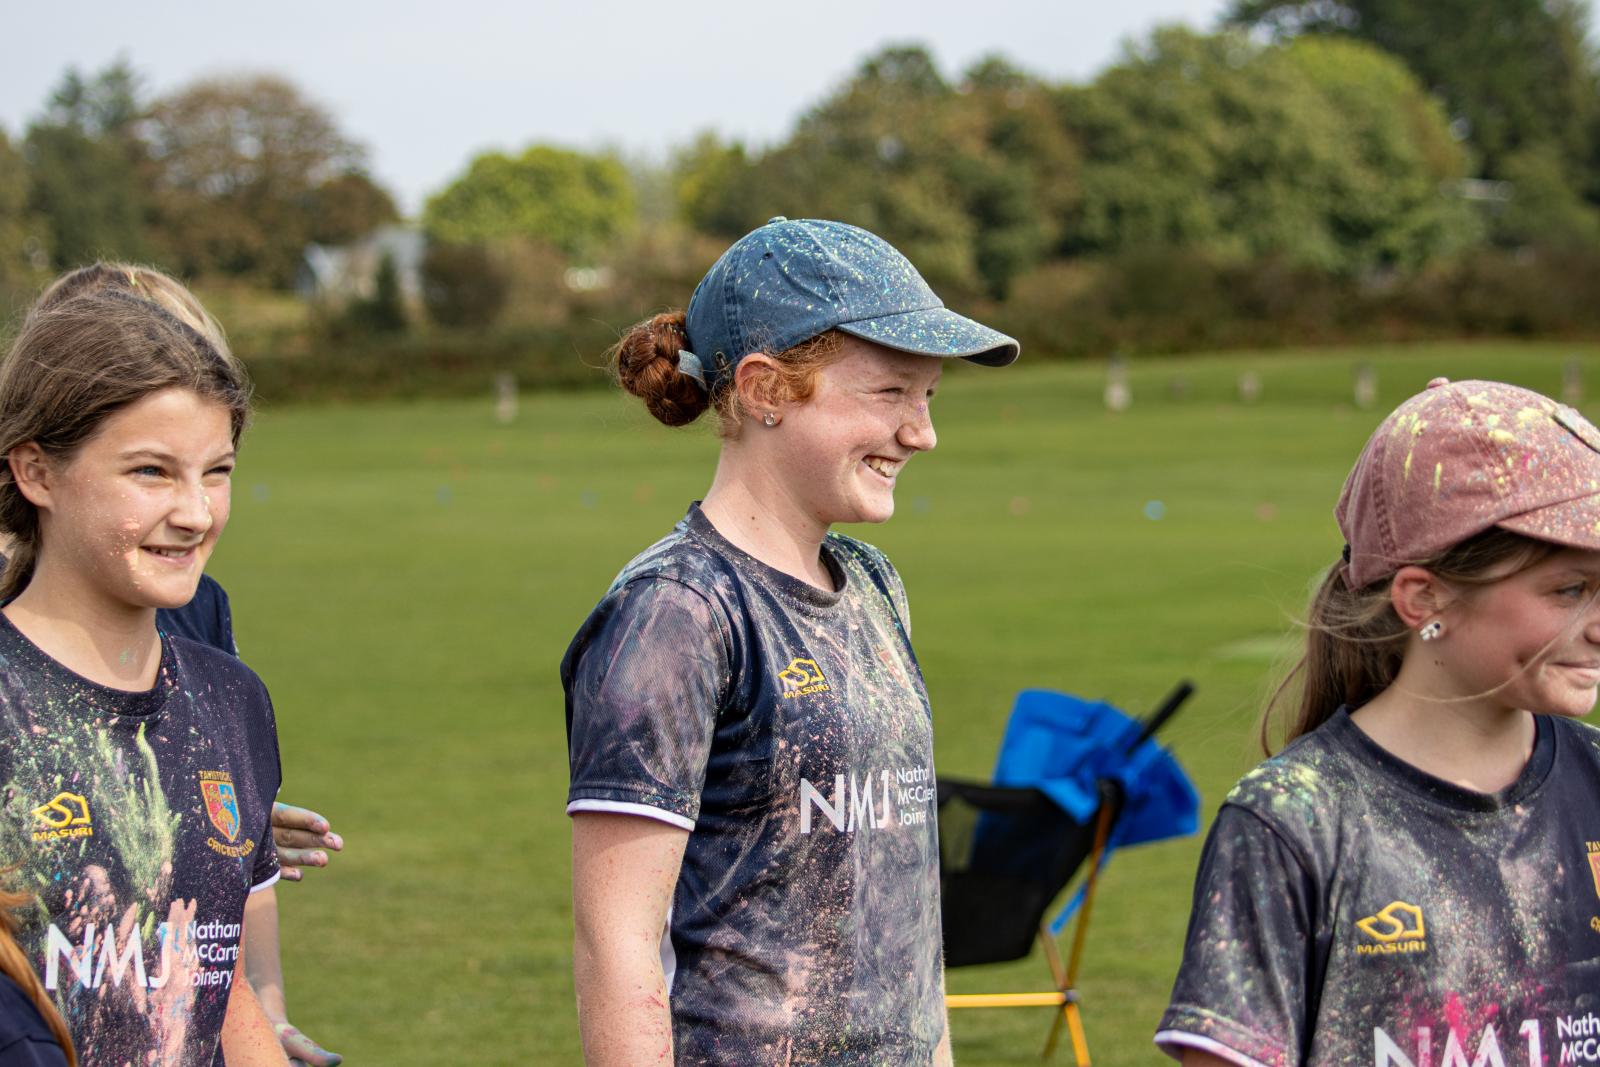 Tavistock CC hosting the 2023 Colour Me Cricket festival helped garner the momentum necessary to set up the girls' section.